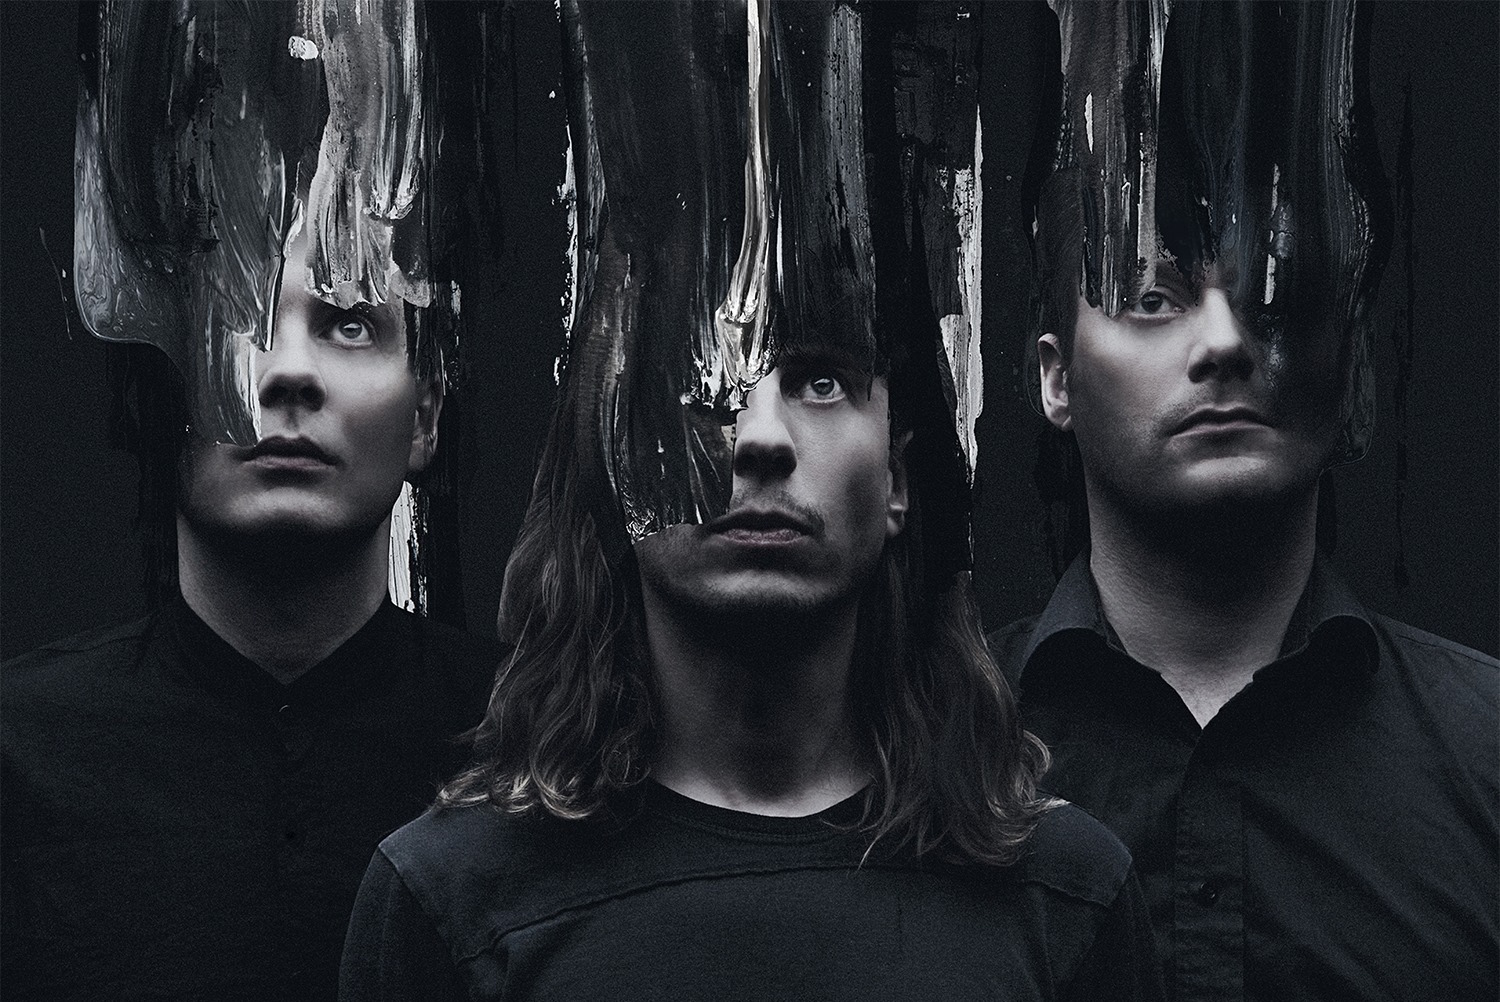 Sigur Ros Share First New Song in Seven Years